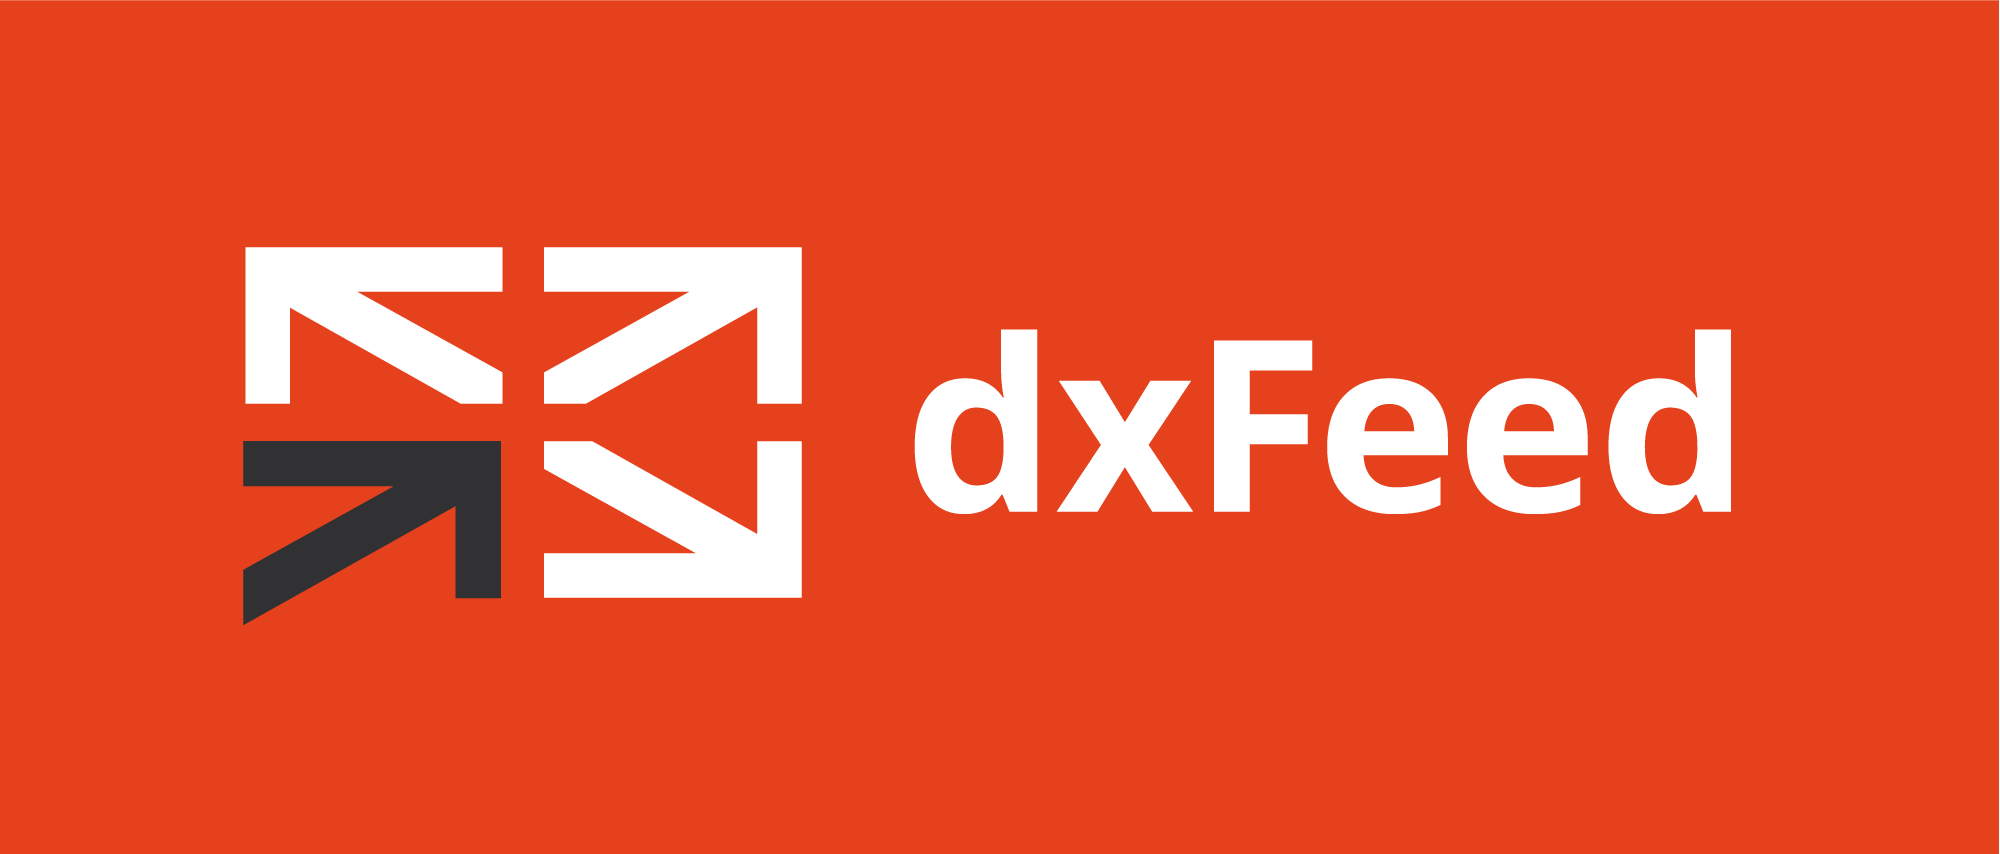 DxFeed